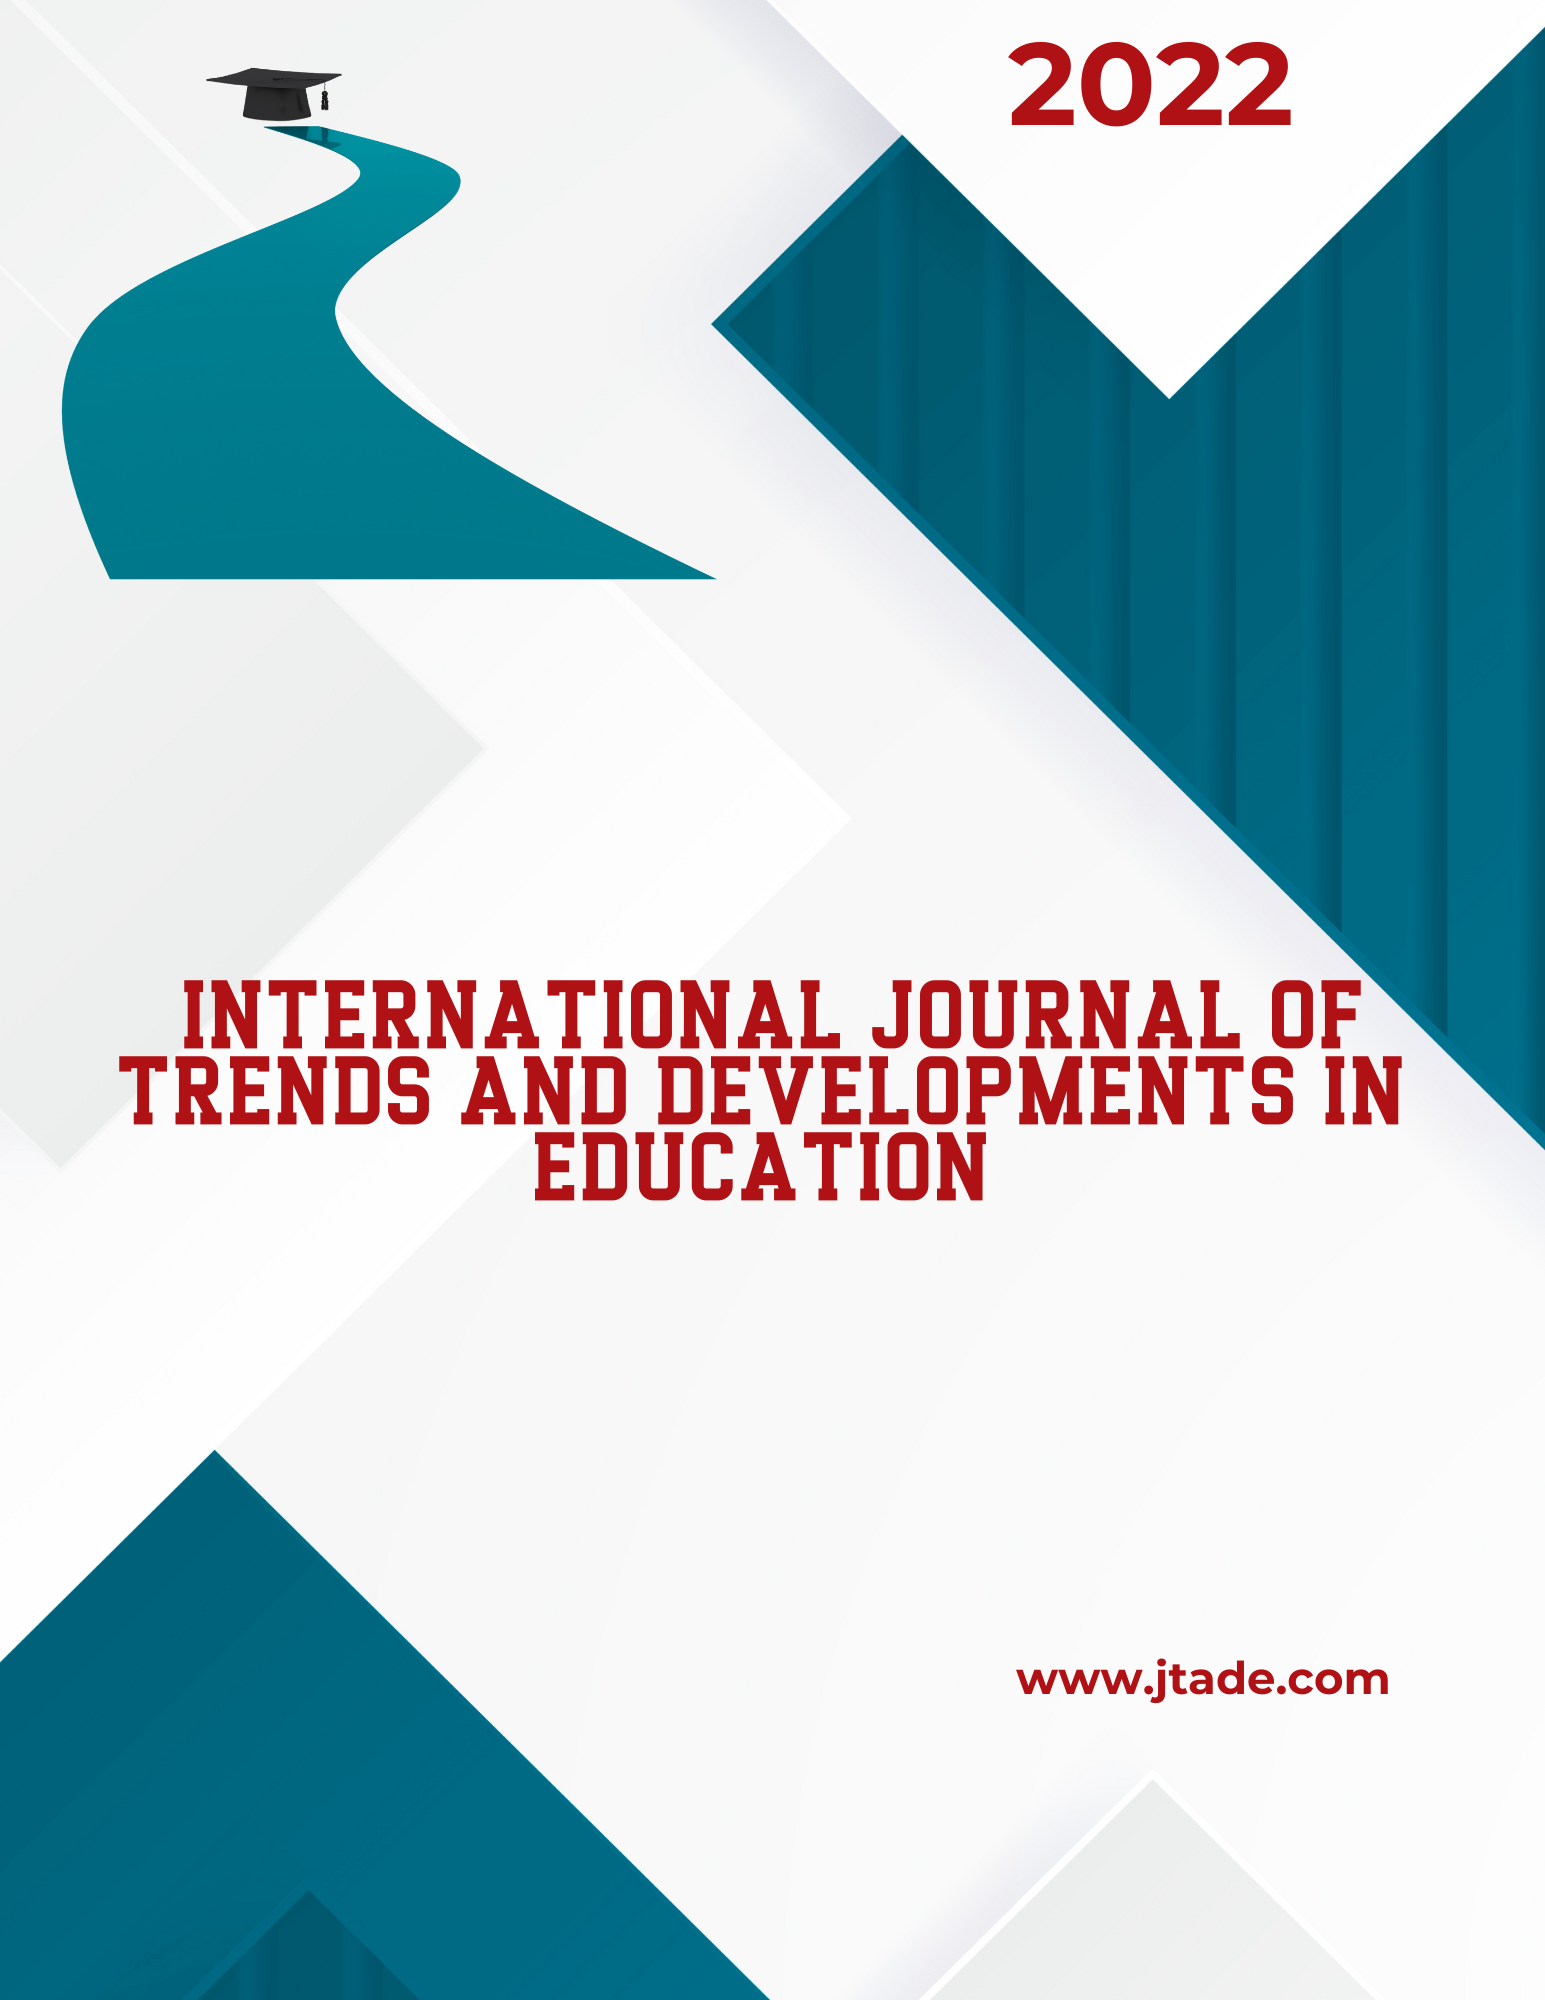 					View Vol. 2 No. 1 (2022): International Journal of Trends and Developments in Education
				